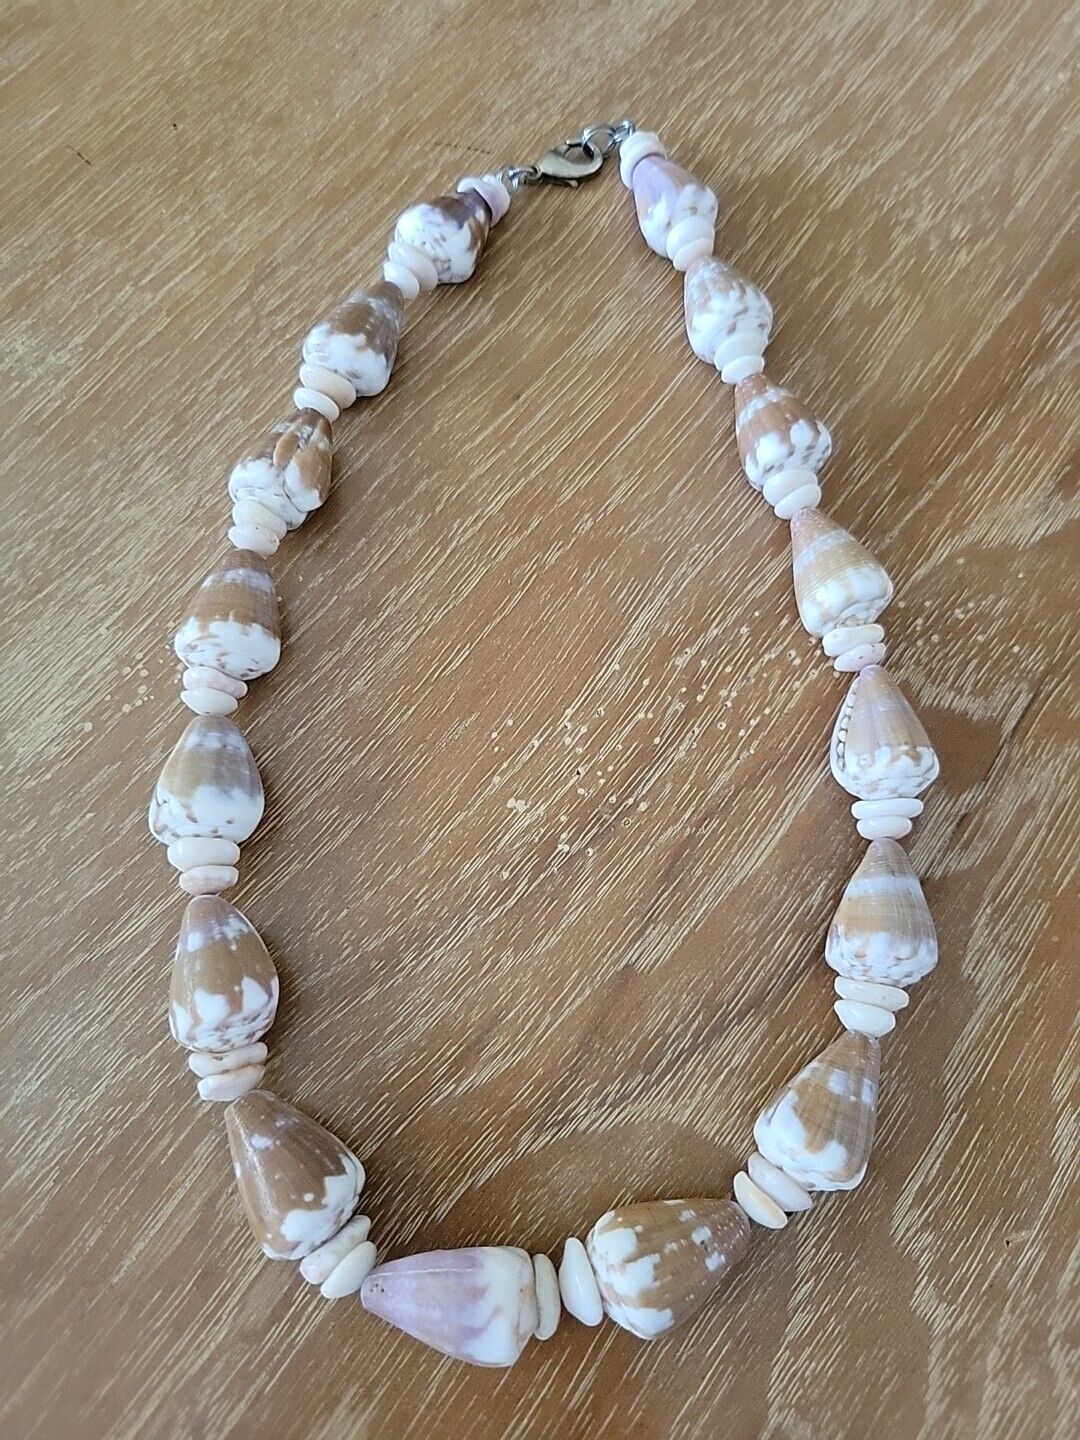 VINTAGE 1970\'s HAWAIIAN RAT CONE SHELL NECKLACE WITH PUKA SHELL SPACERS.